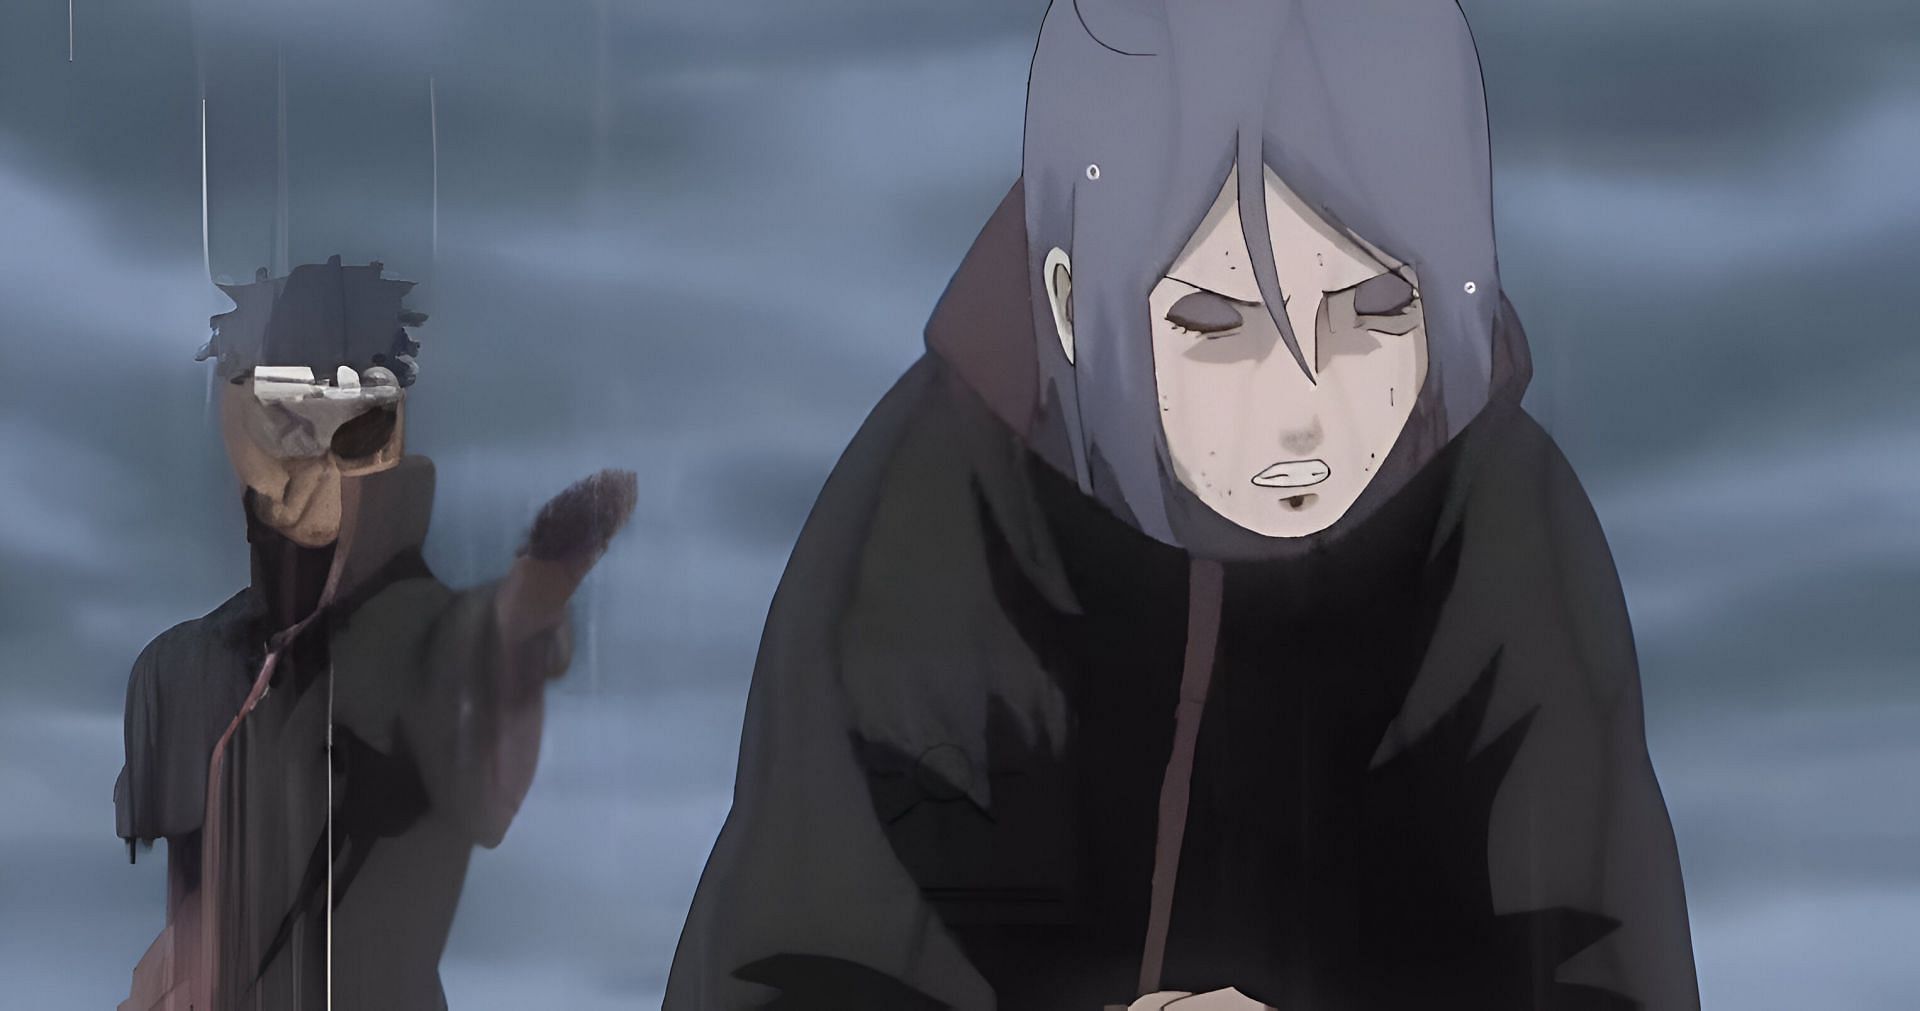 Obito (left) and Konan (right) as seen in the anime (Image via Studio Pierrot)